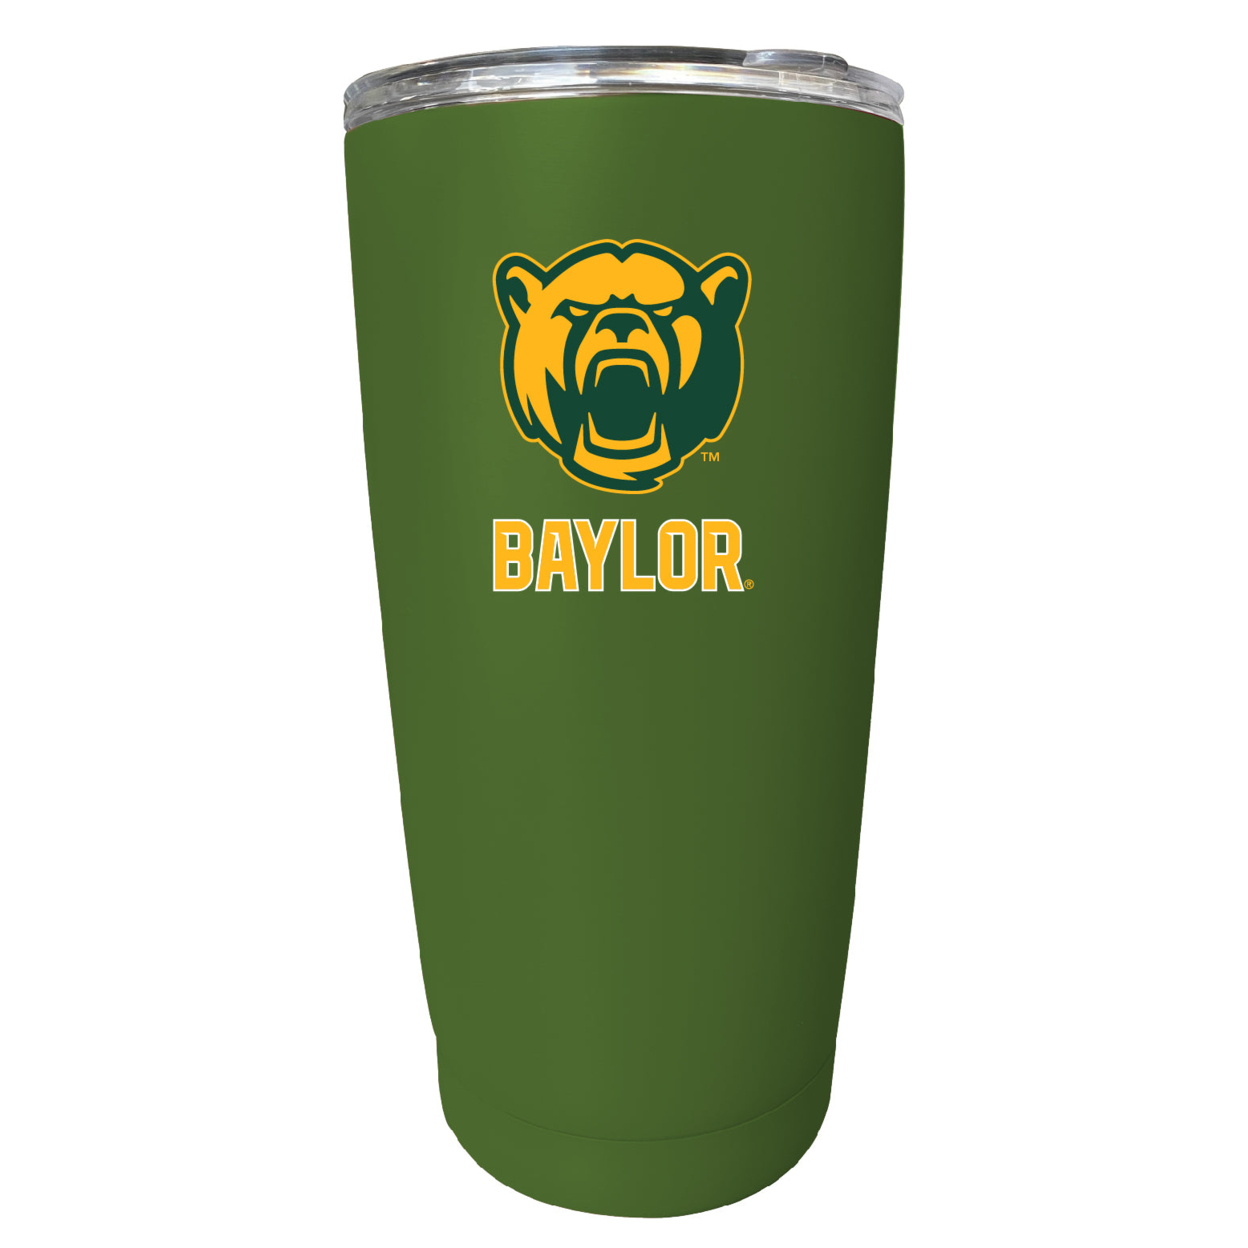 Baylor Bears 16 Oz Stainless Steel Insulated Tumbler - Pink